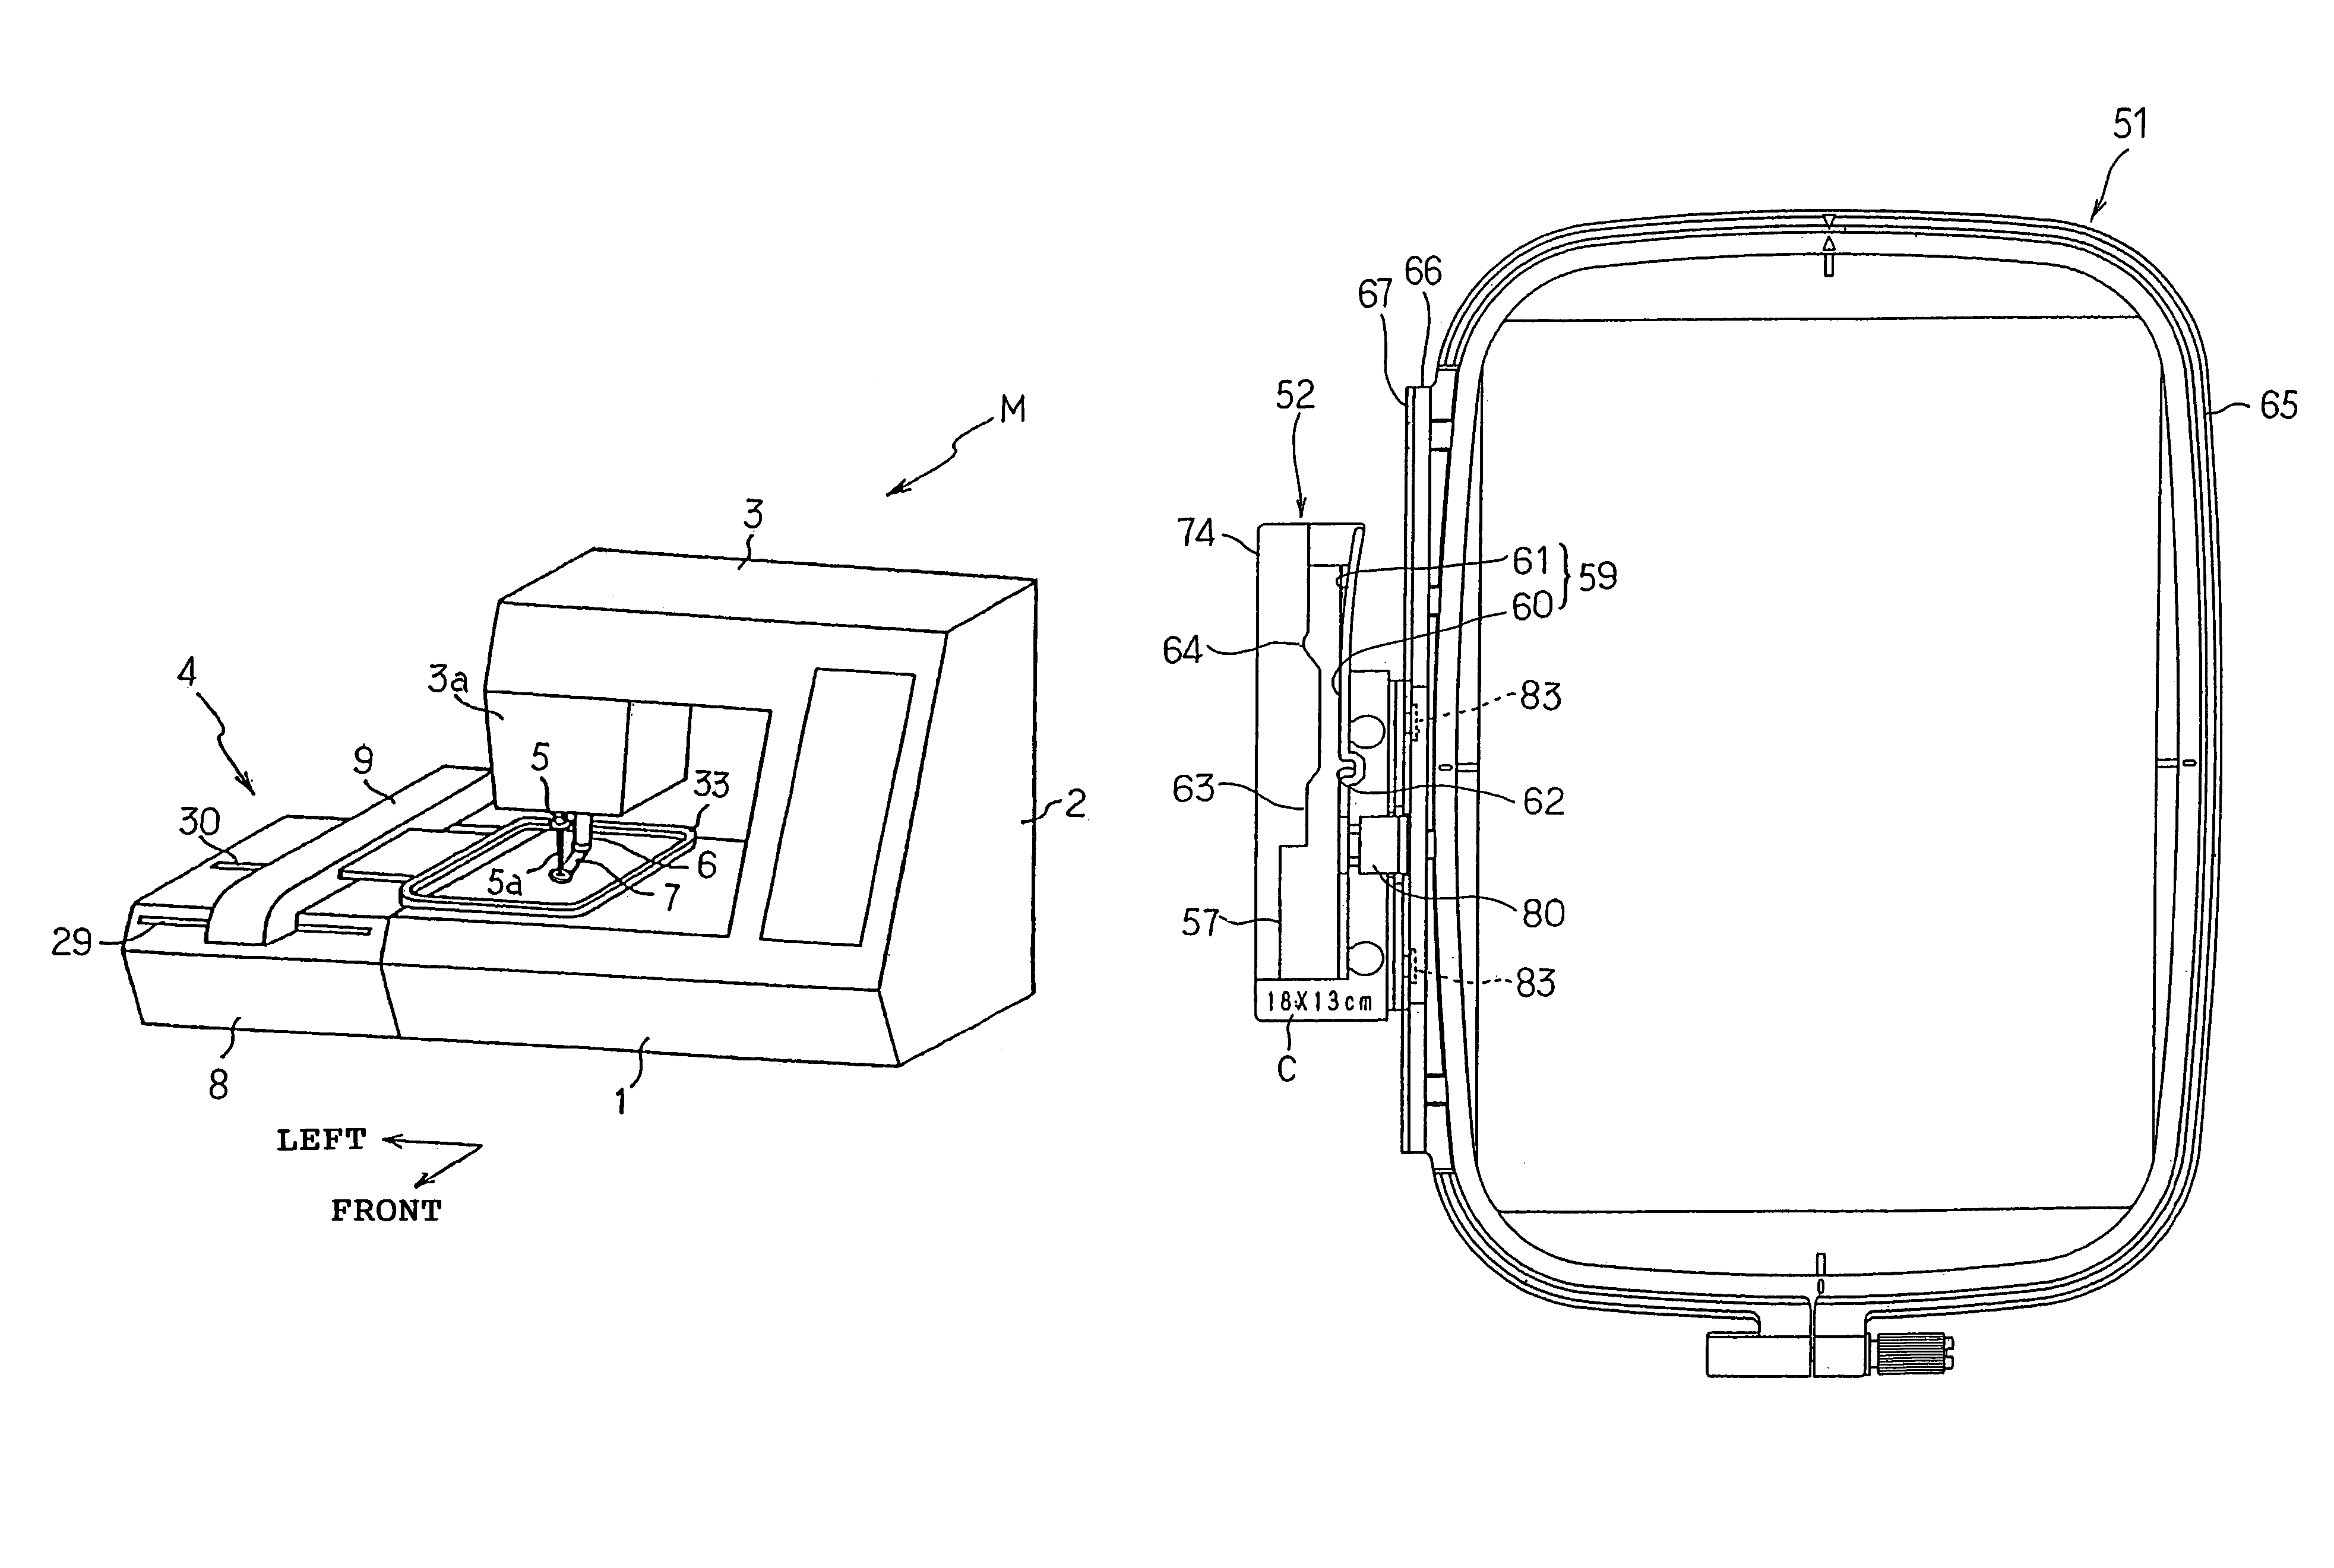 Embroidery frame transfer device and attachment